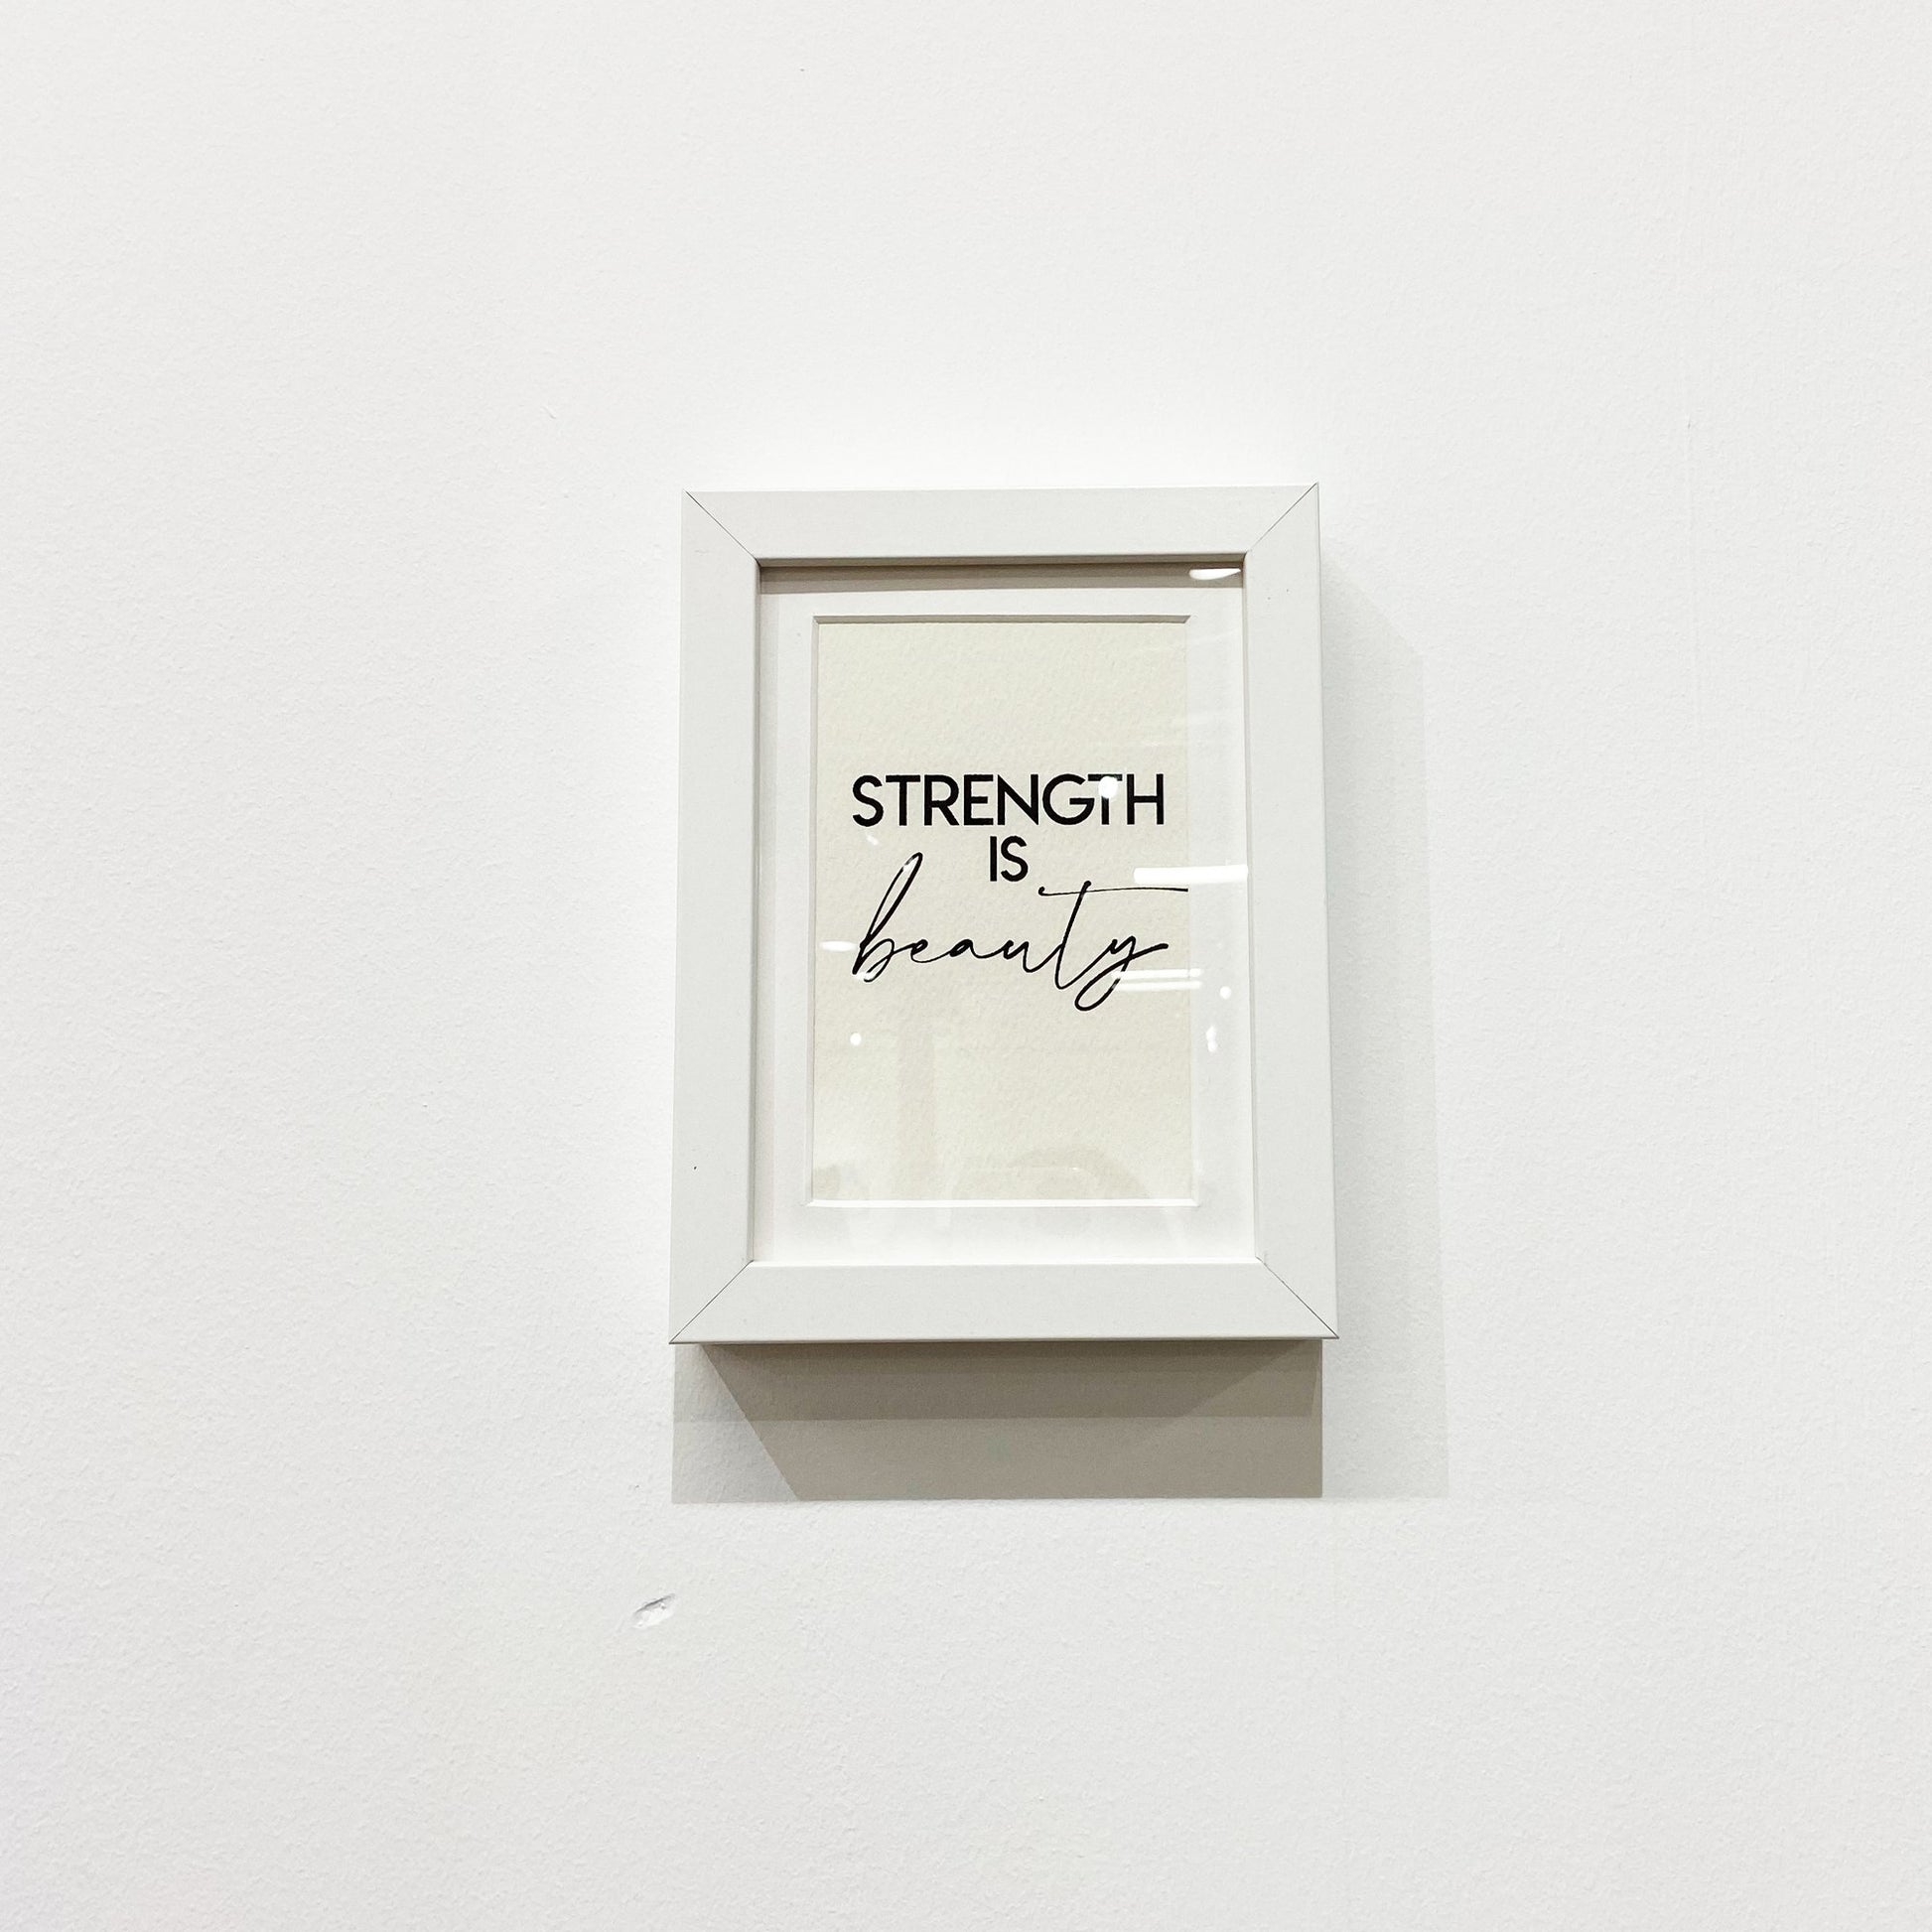 Strength is Beauty (Mantra) Framed A5 Print - Actively Conscious